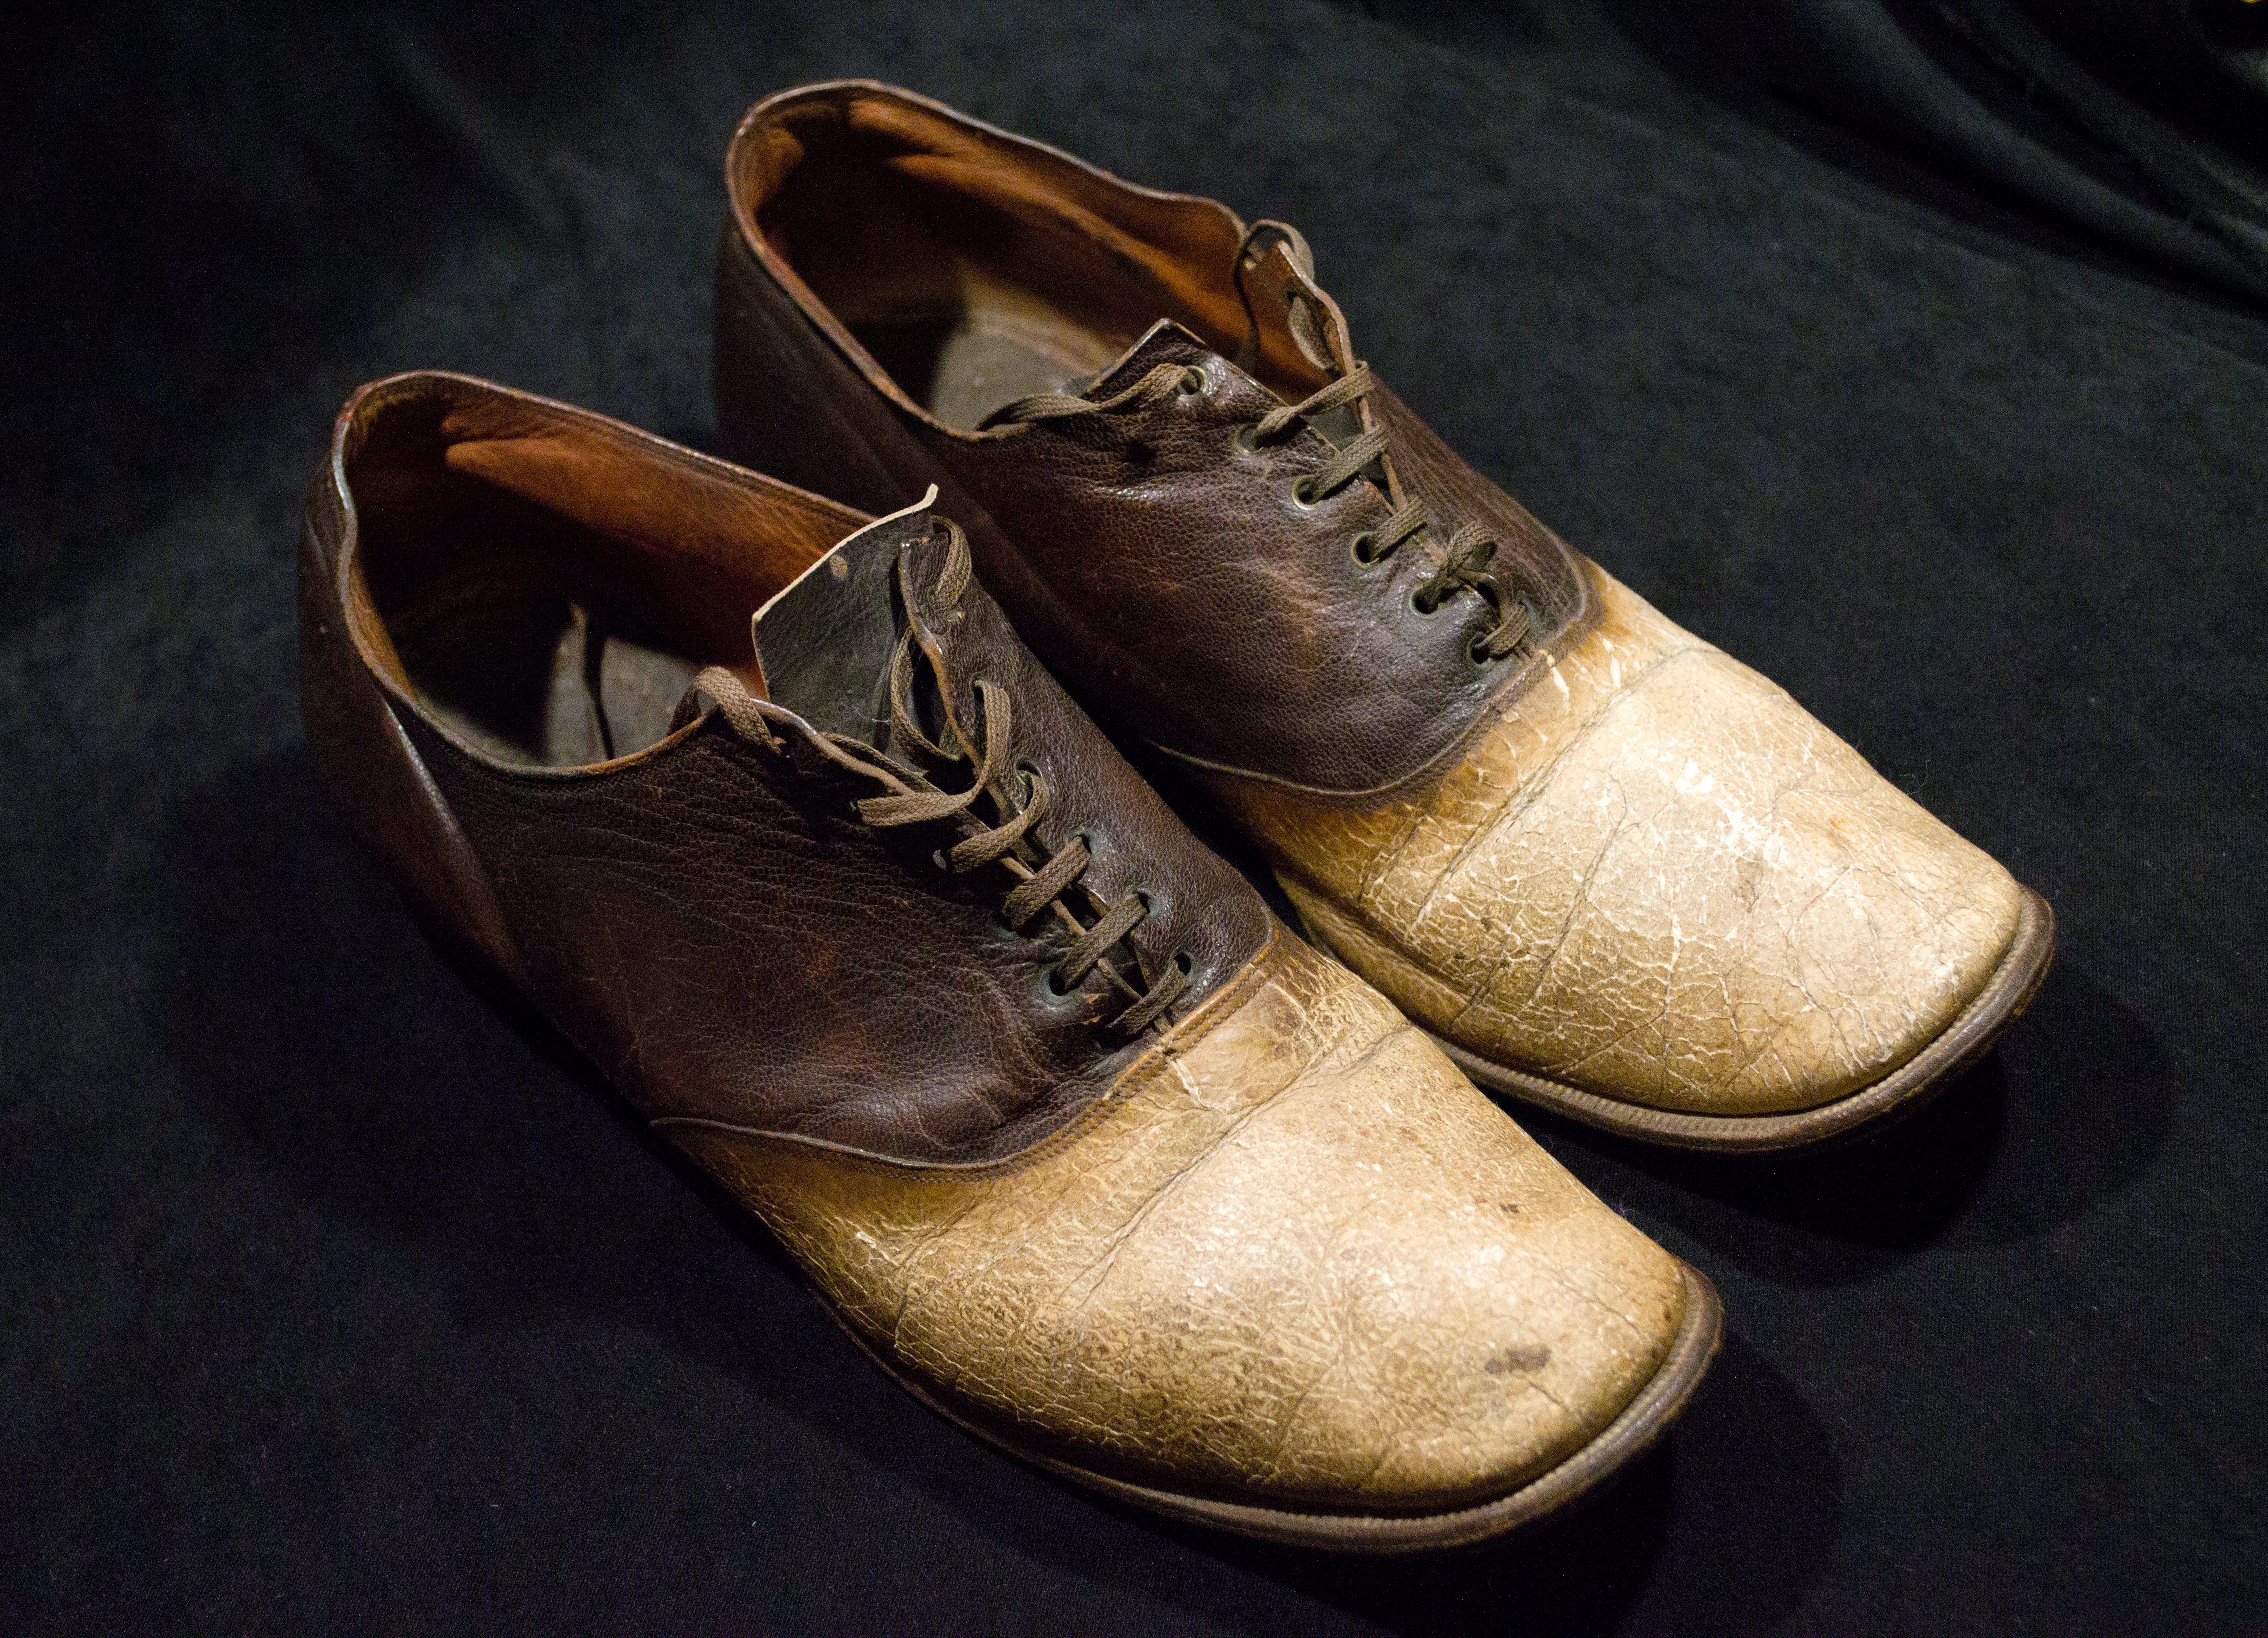 An Outlaw's Skin Was Made Into Shoes - Atlas Obscura